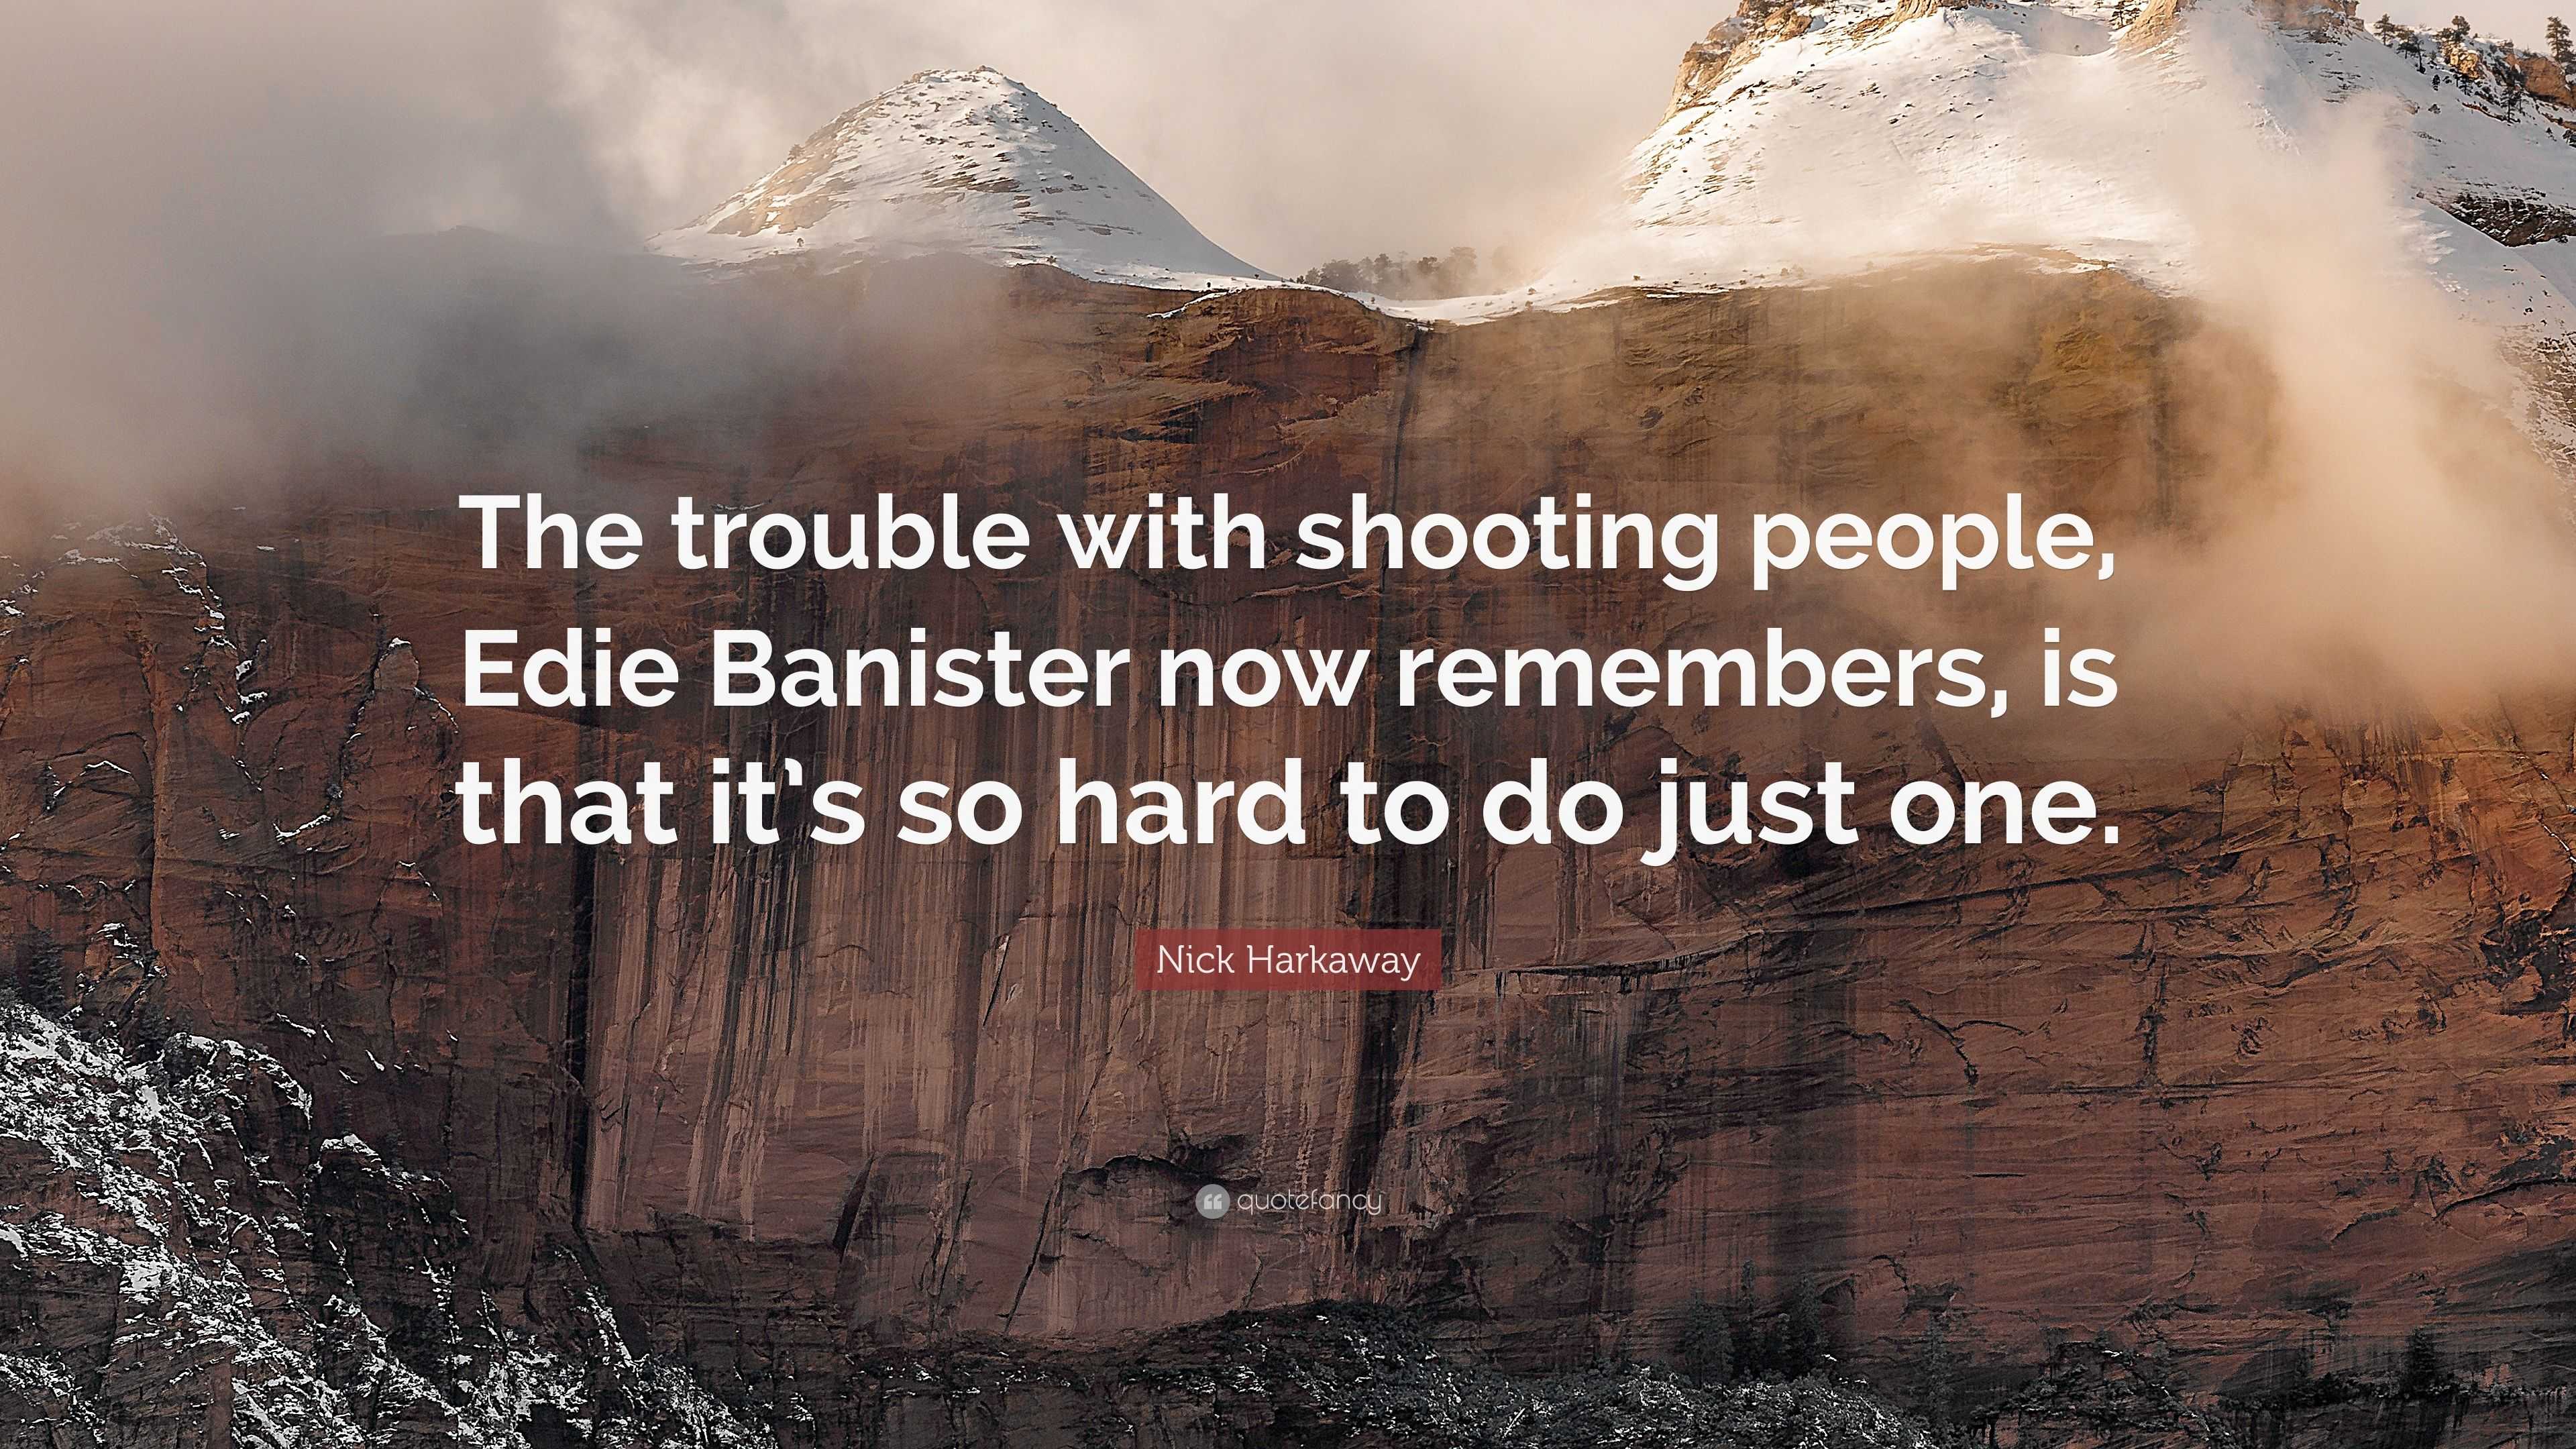 https://quotefancy.com/media/wallpaper/3840x2160/3984696-Nick-Harkaway-Quote-The-trouble-with-shooting-people-Edie-Banister.jpg